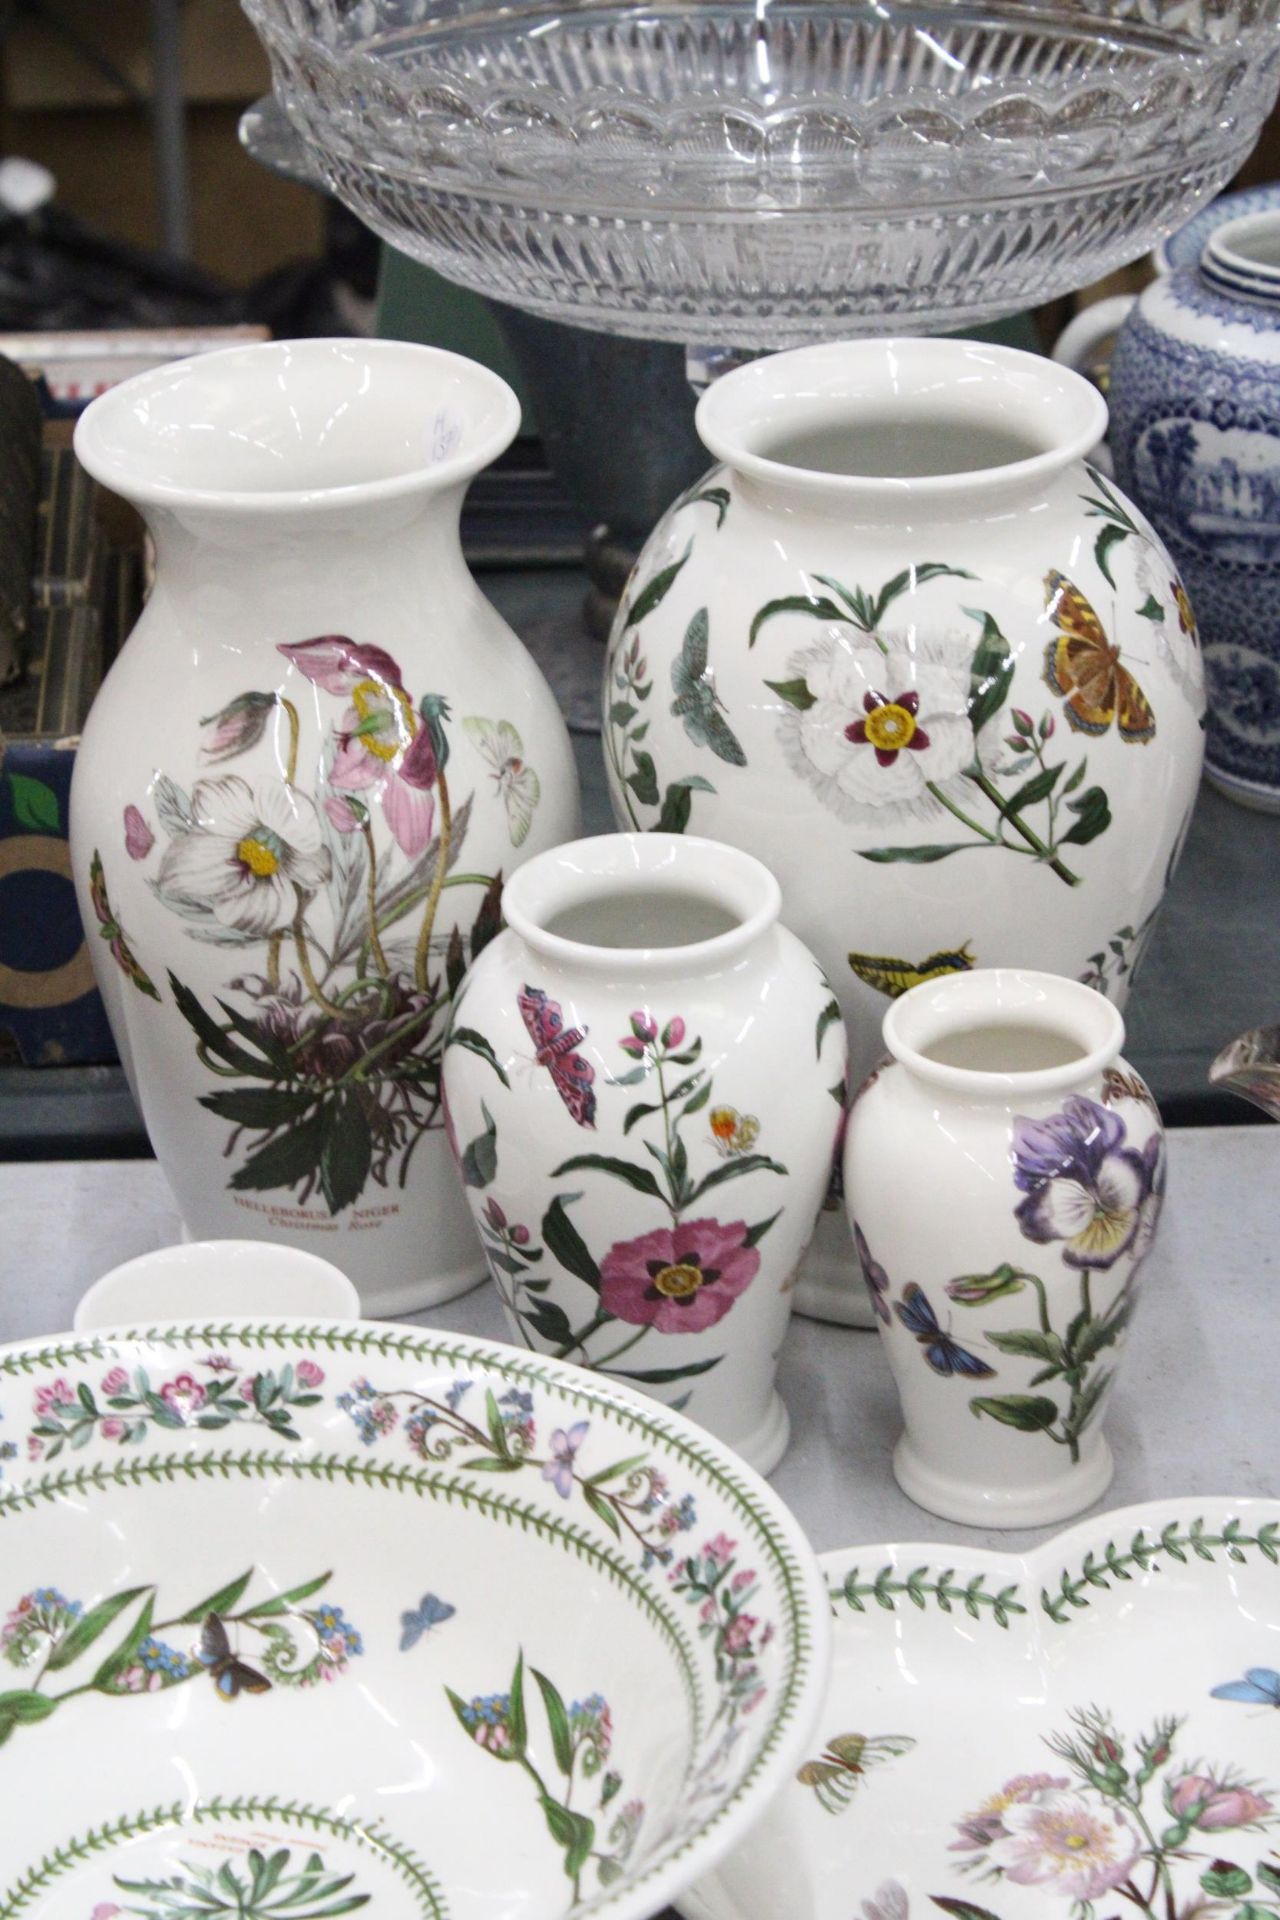 A COLLECTION OF PORTMEIRION TO INCLUDE LARGE VASES, SMALLER VASES, A LARGE BOWL, HEART SHAPED - Image 2 of 6